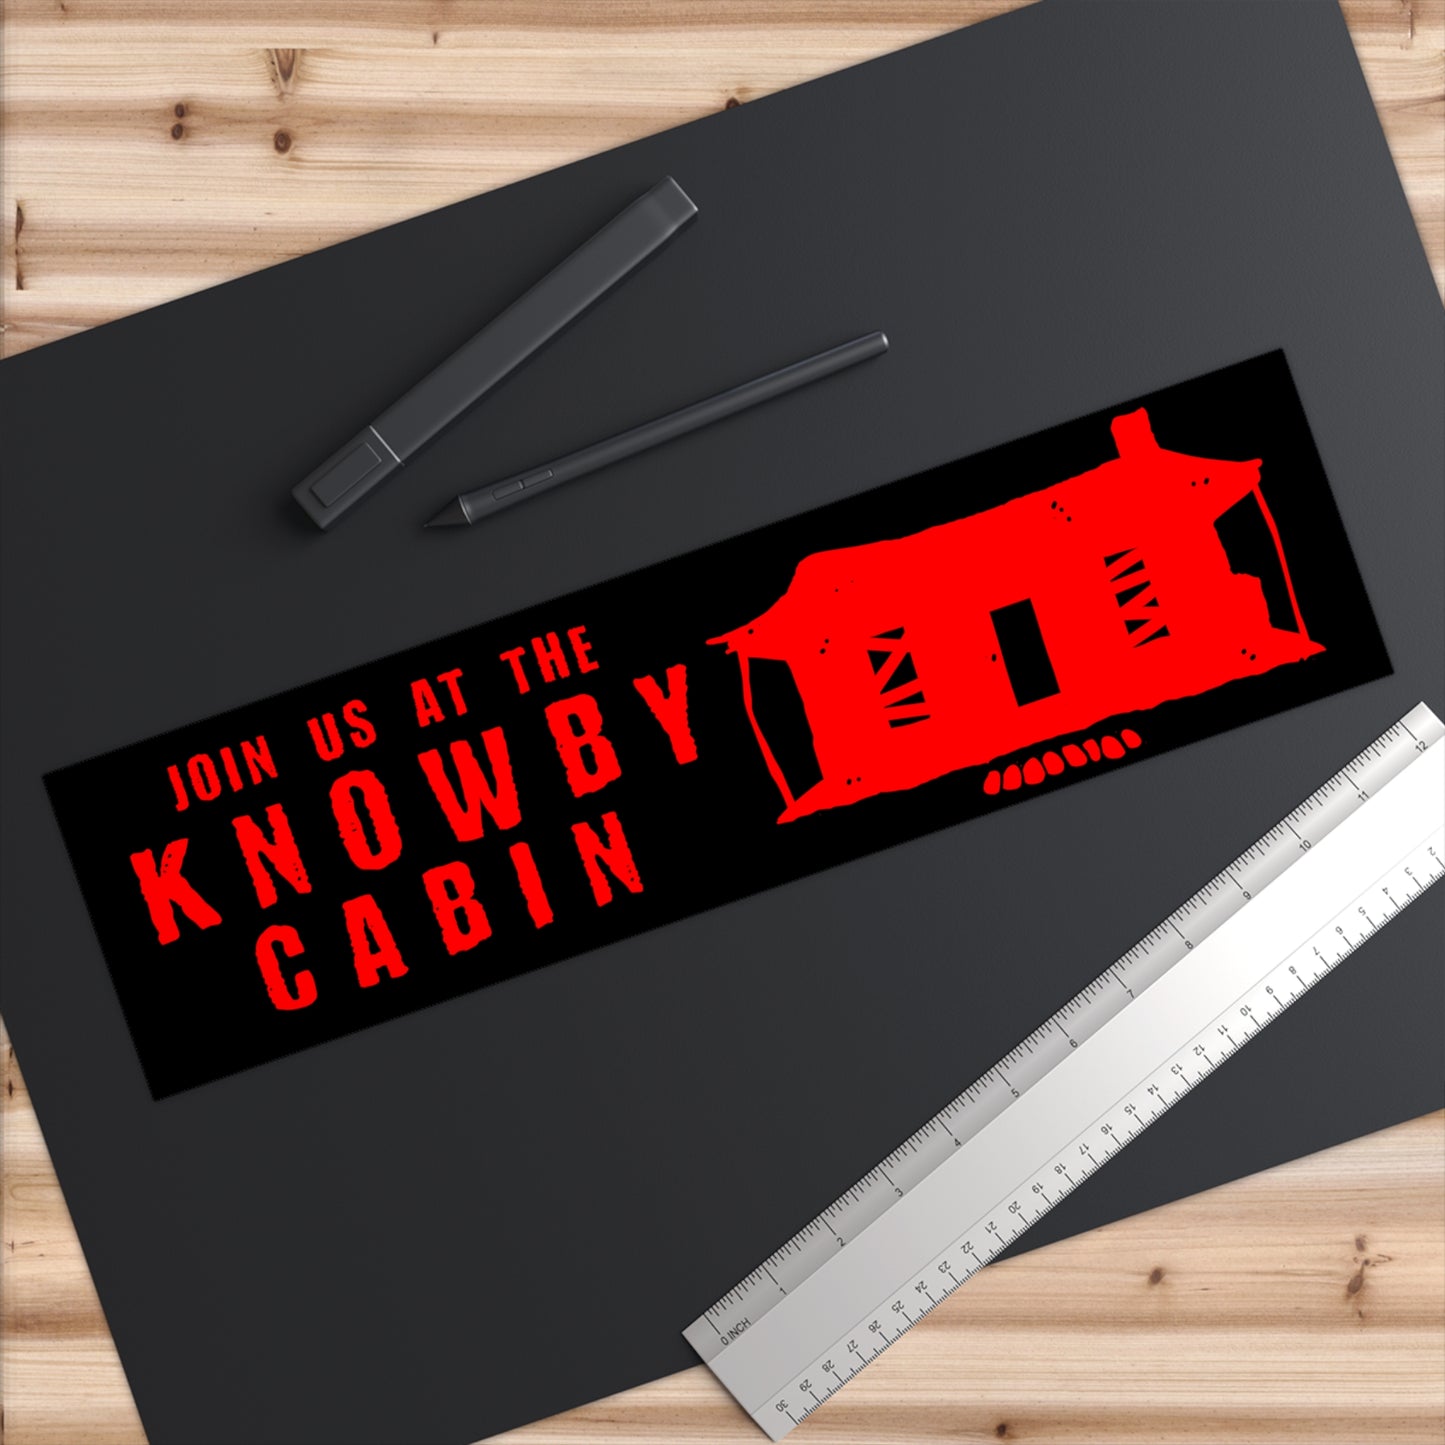 Join Us at the Knowby Cabin bumper sticker